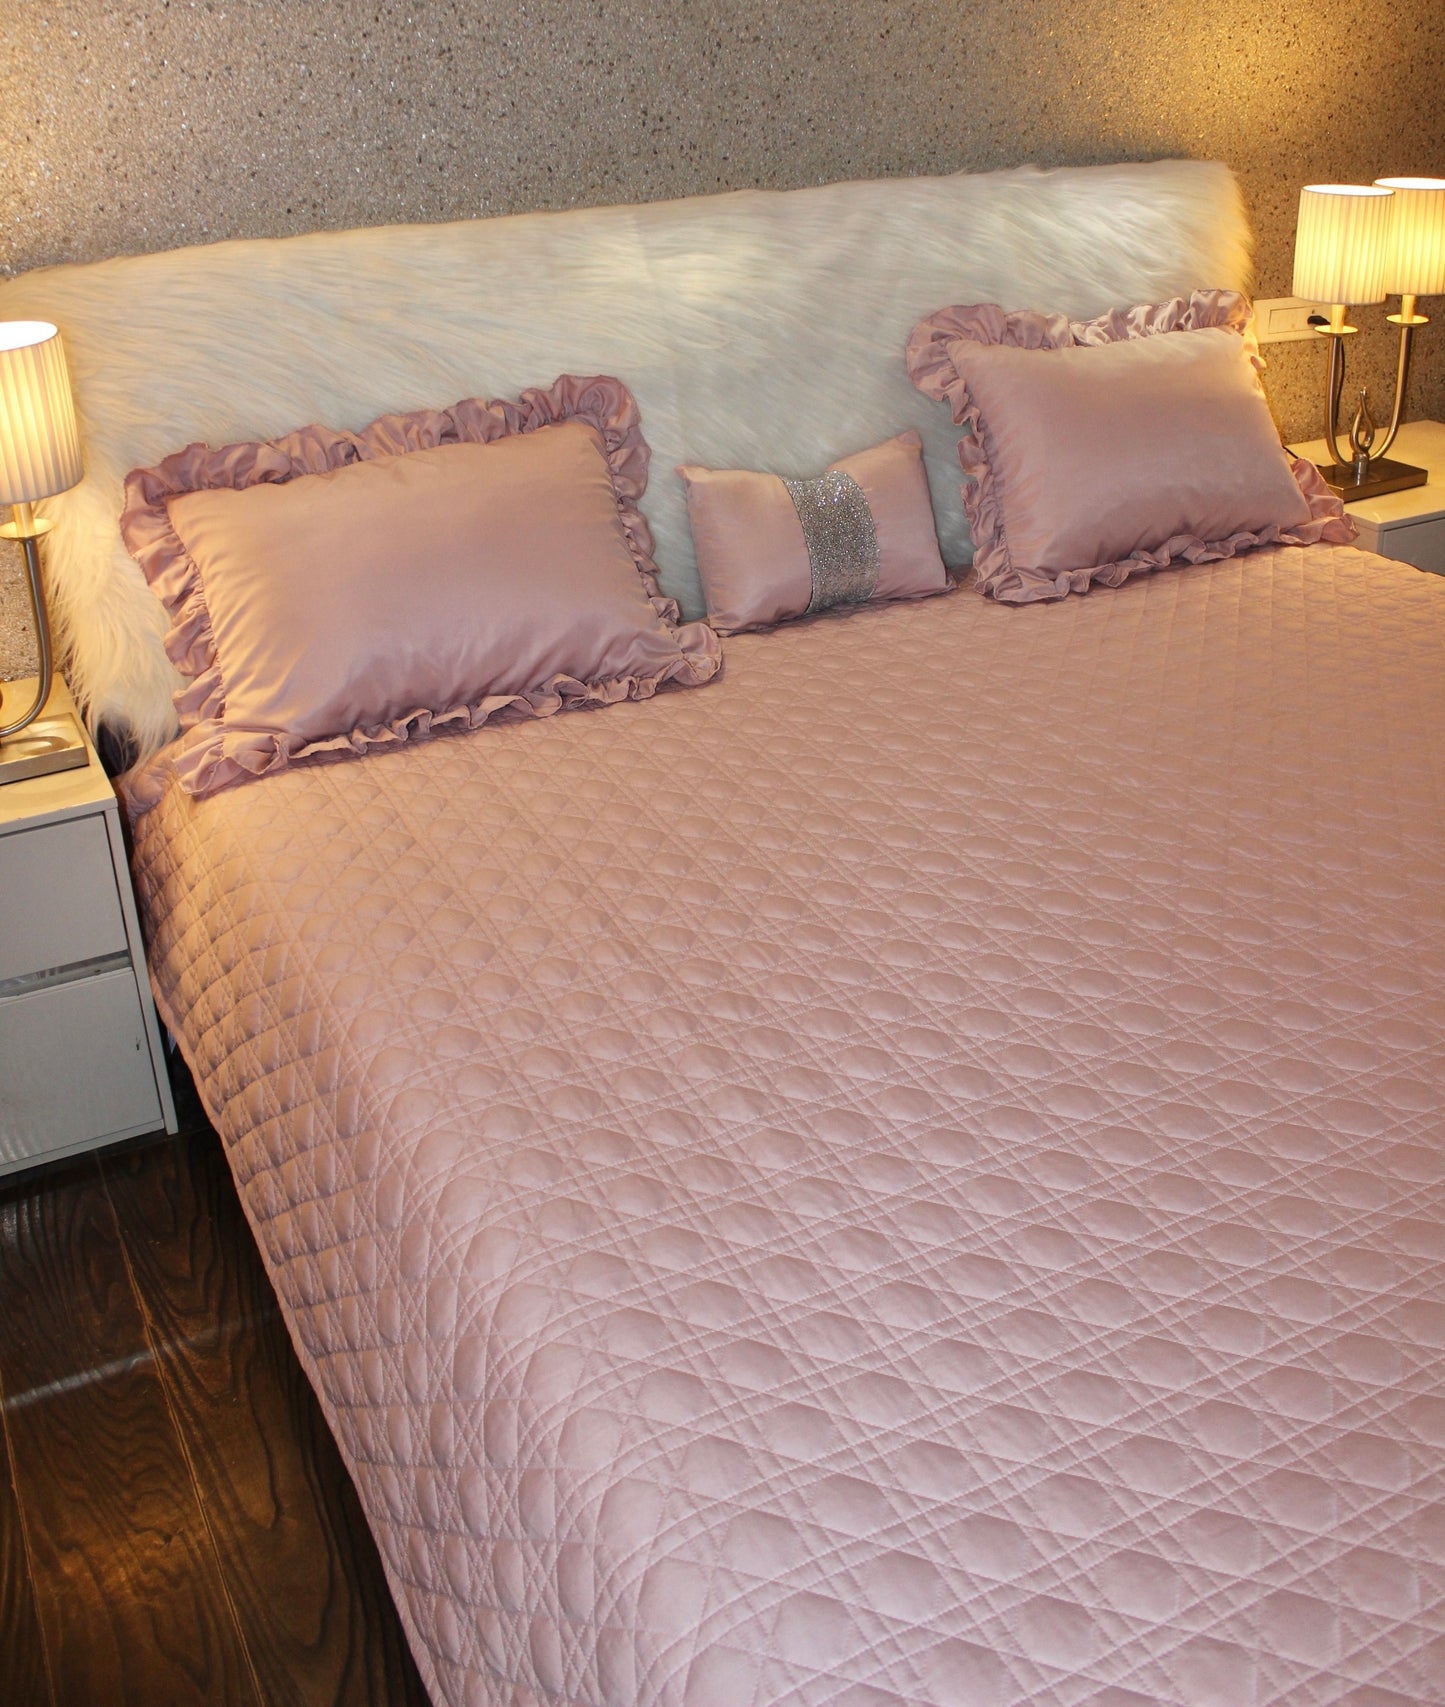 Rose Chester Bedspread (Polyester cotton)